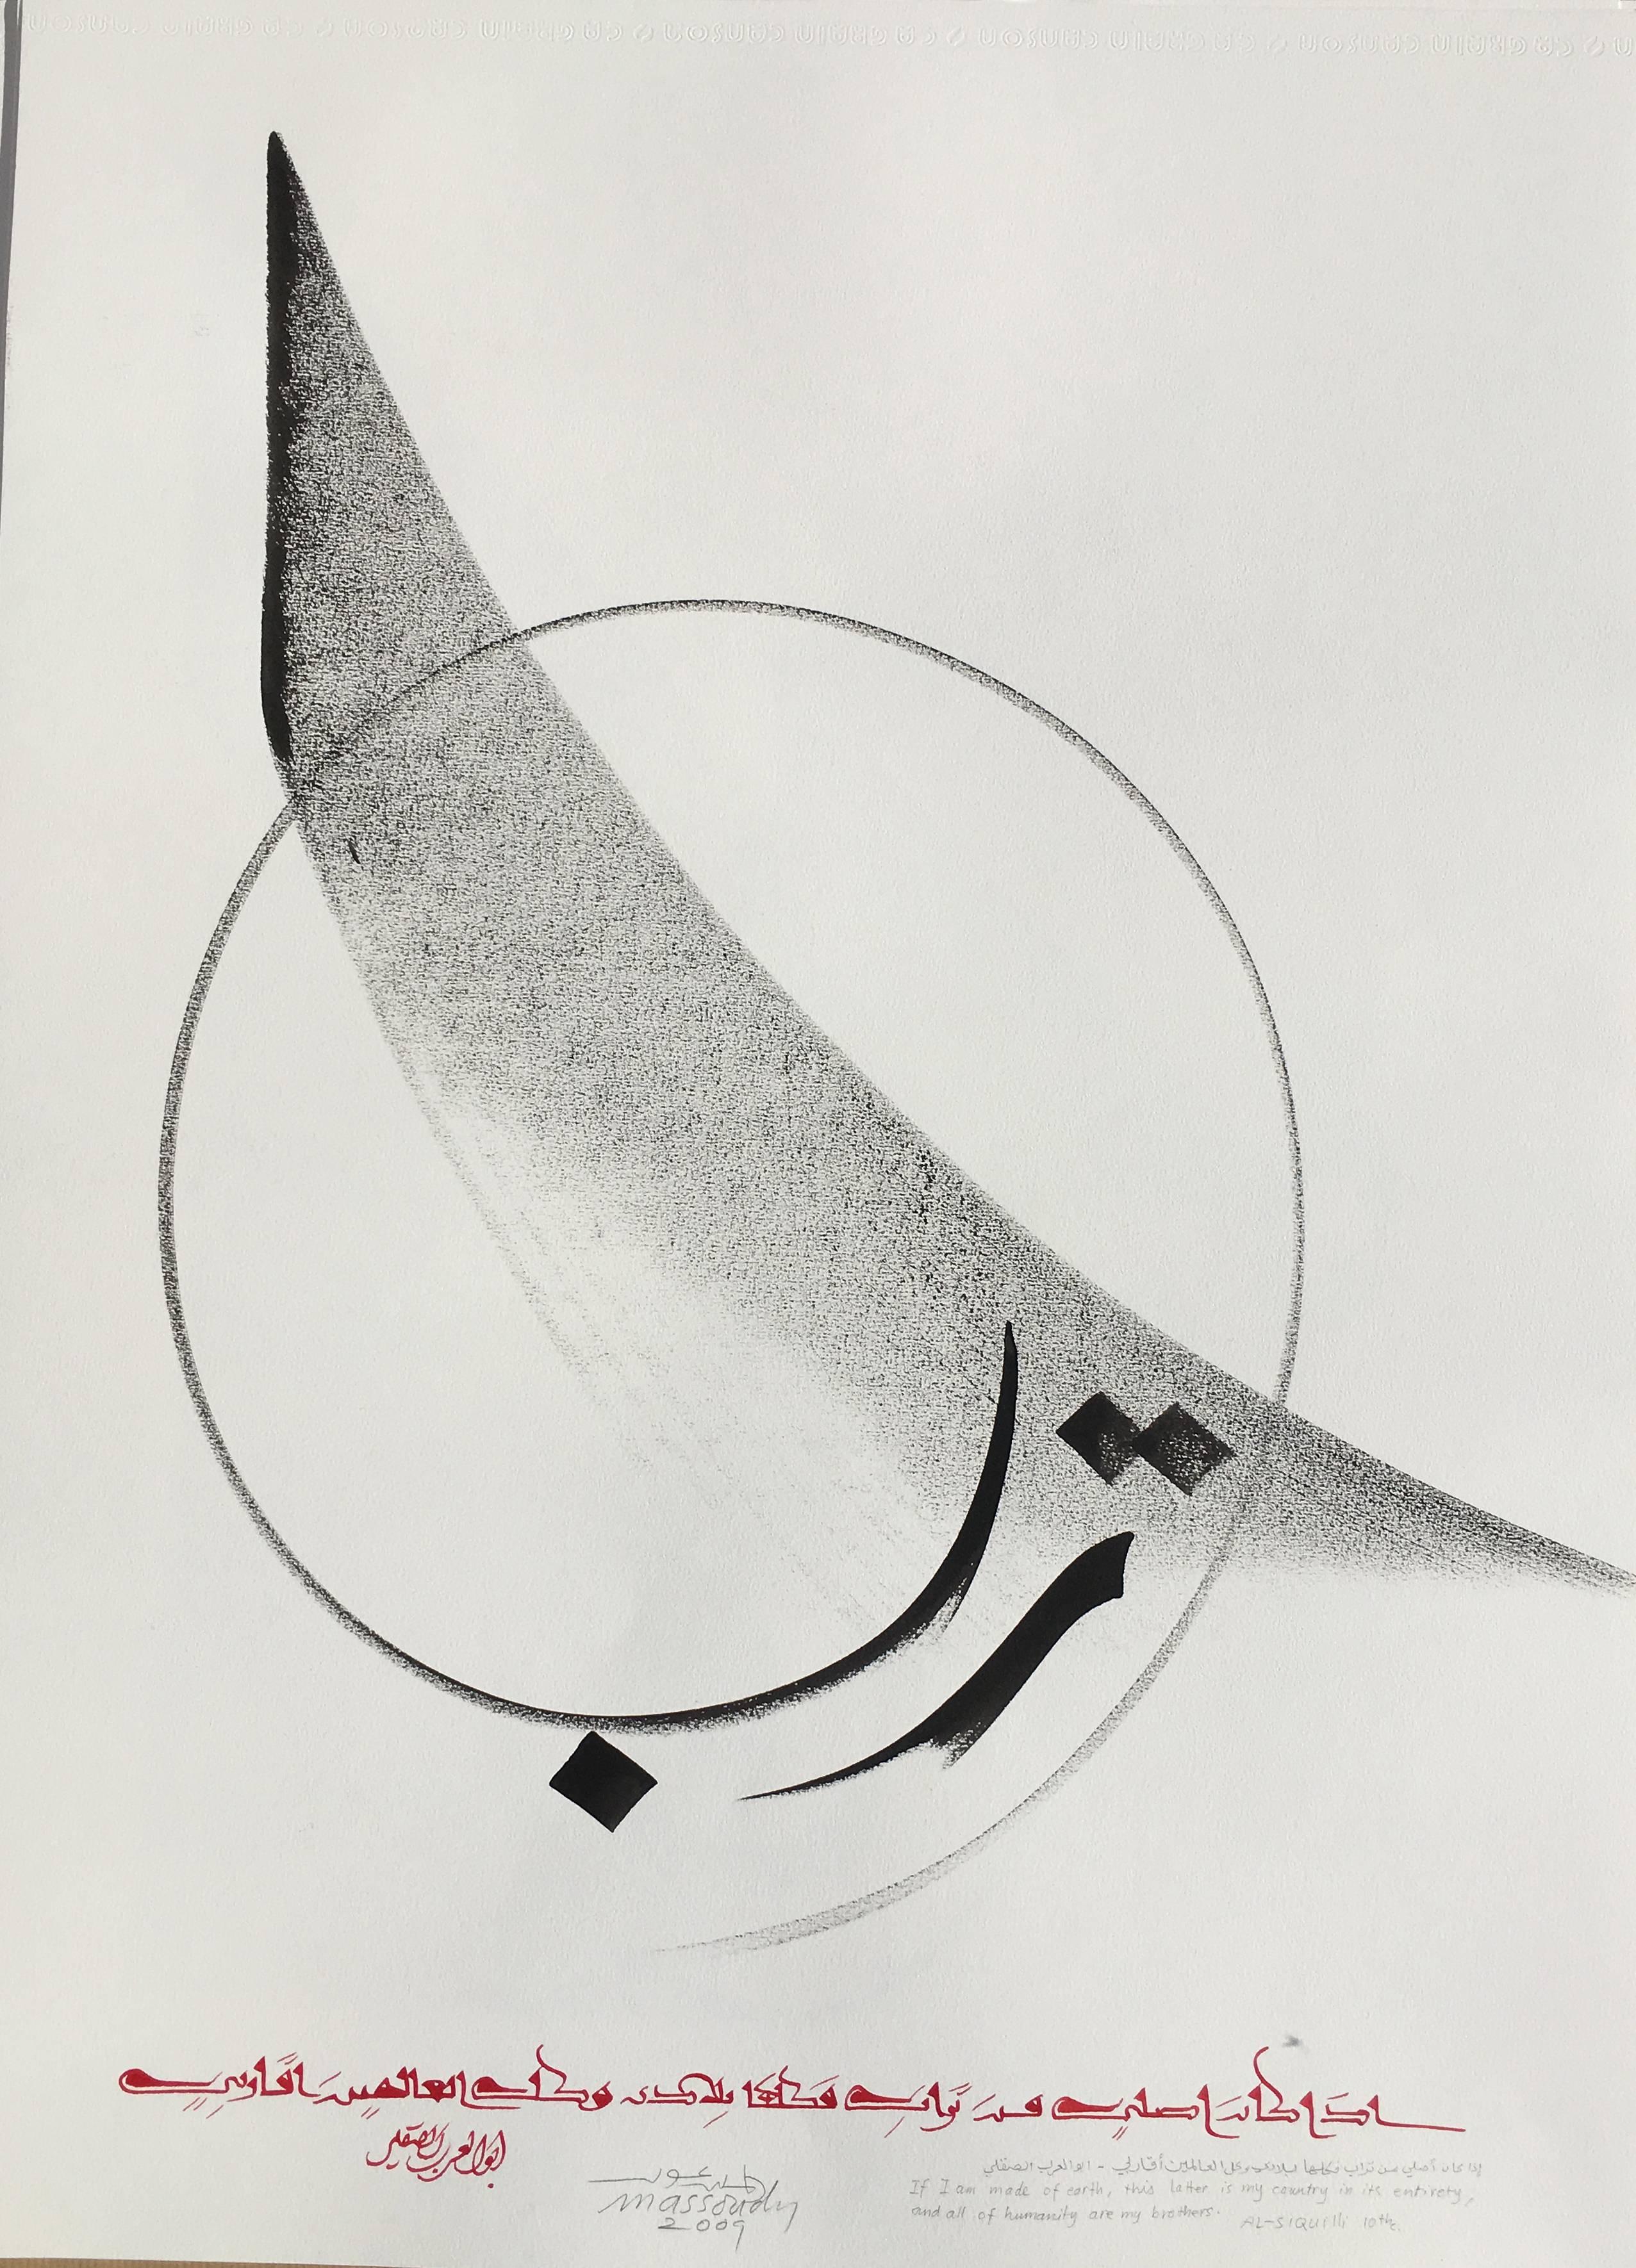 Hassan Massoudy Abstract Drawing - Untitled ("If I am made of earth, this is my country in its entirety...)